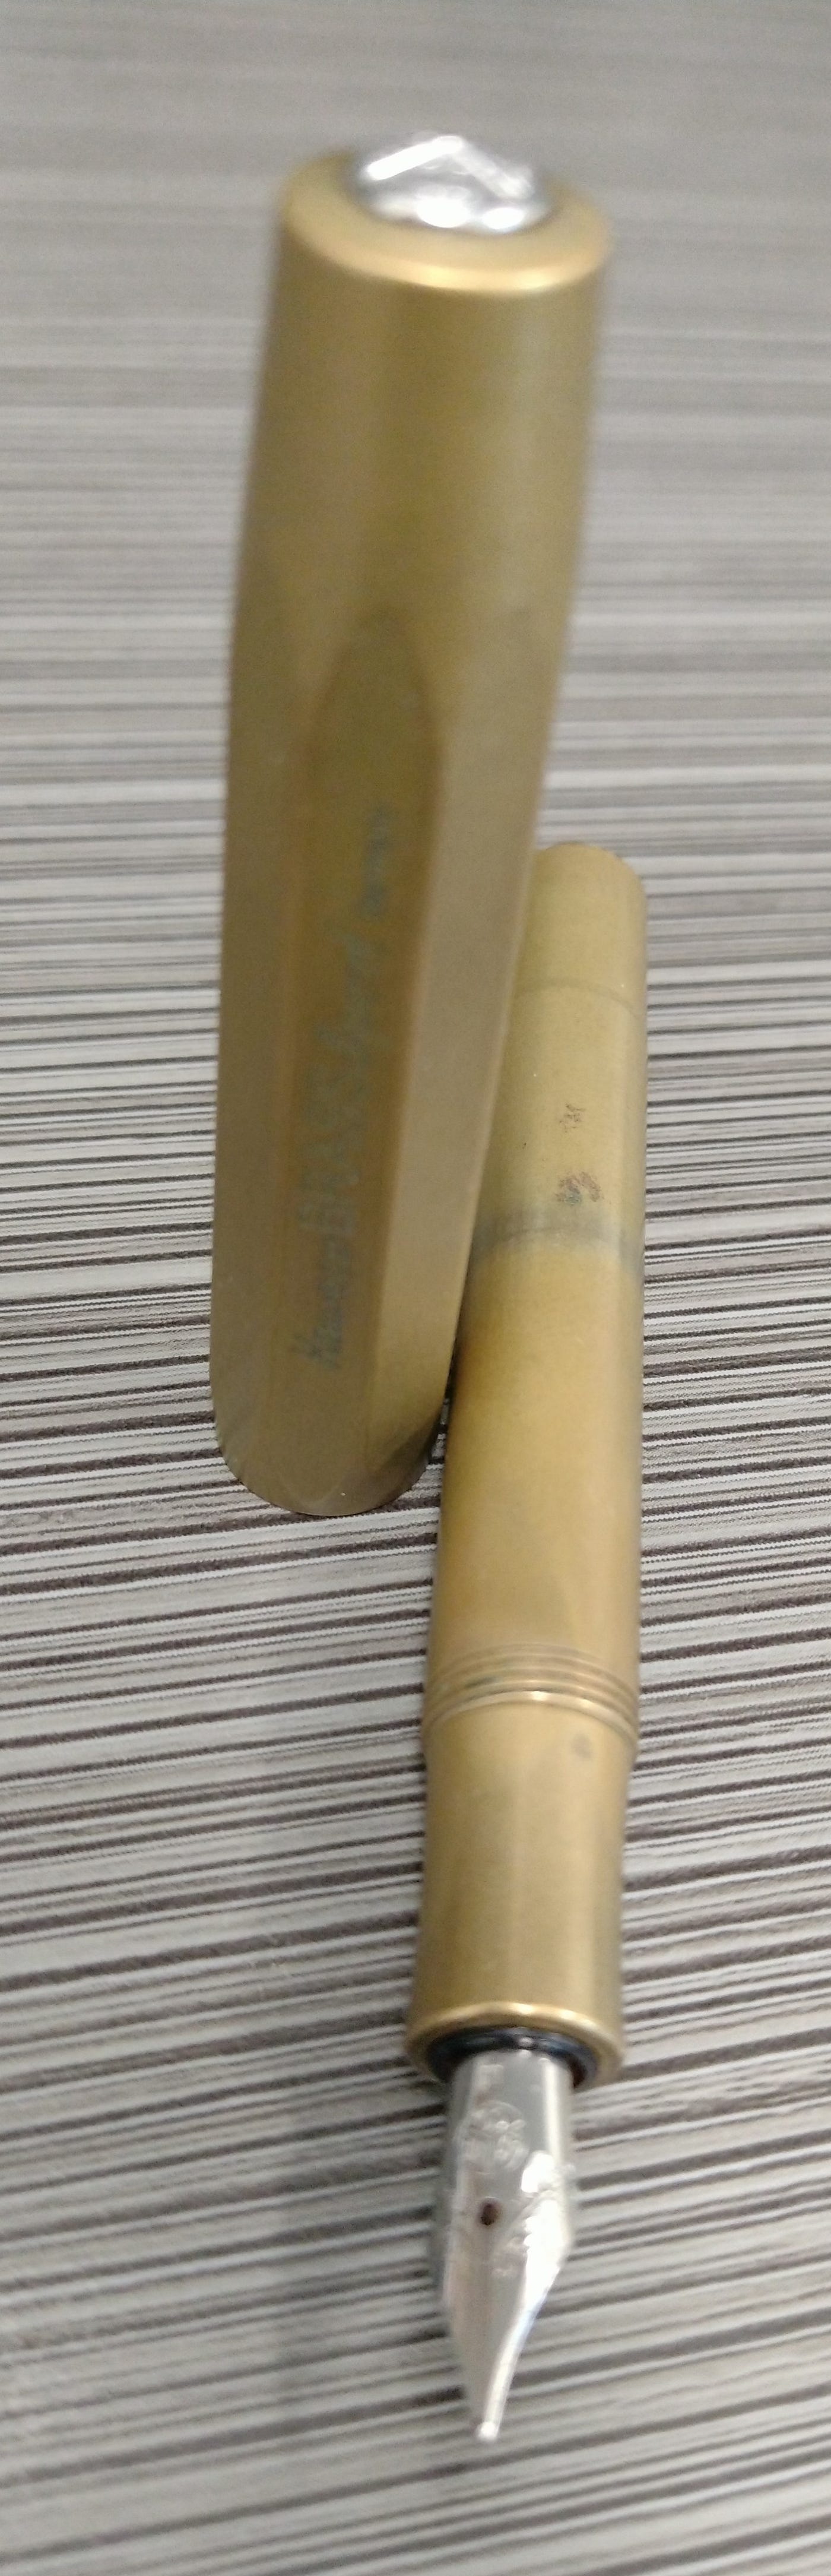 Fountain pen review ~ Kaweco Brass Sport, by The Doctor's Scrawl